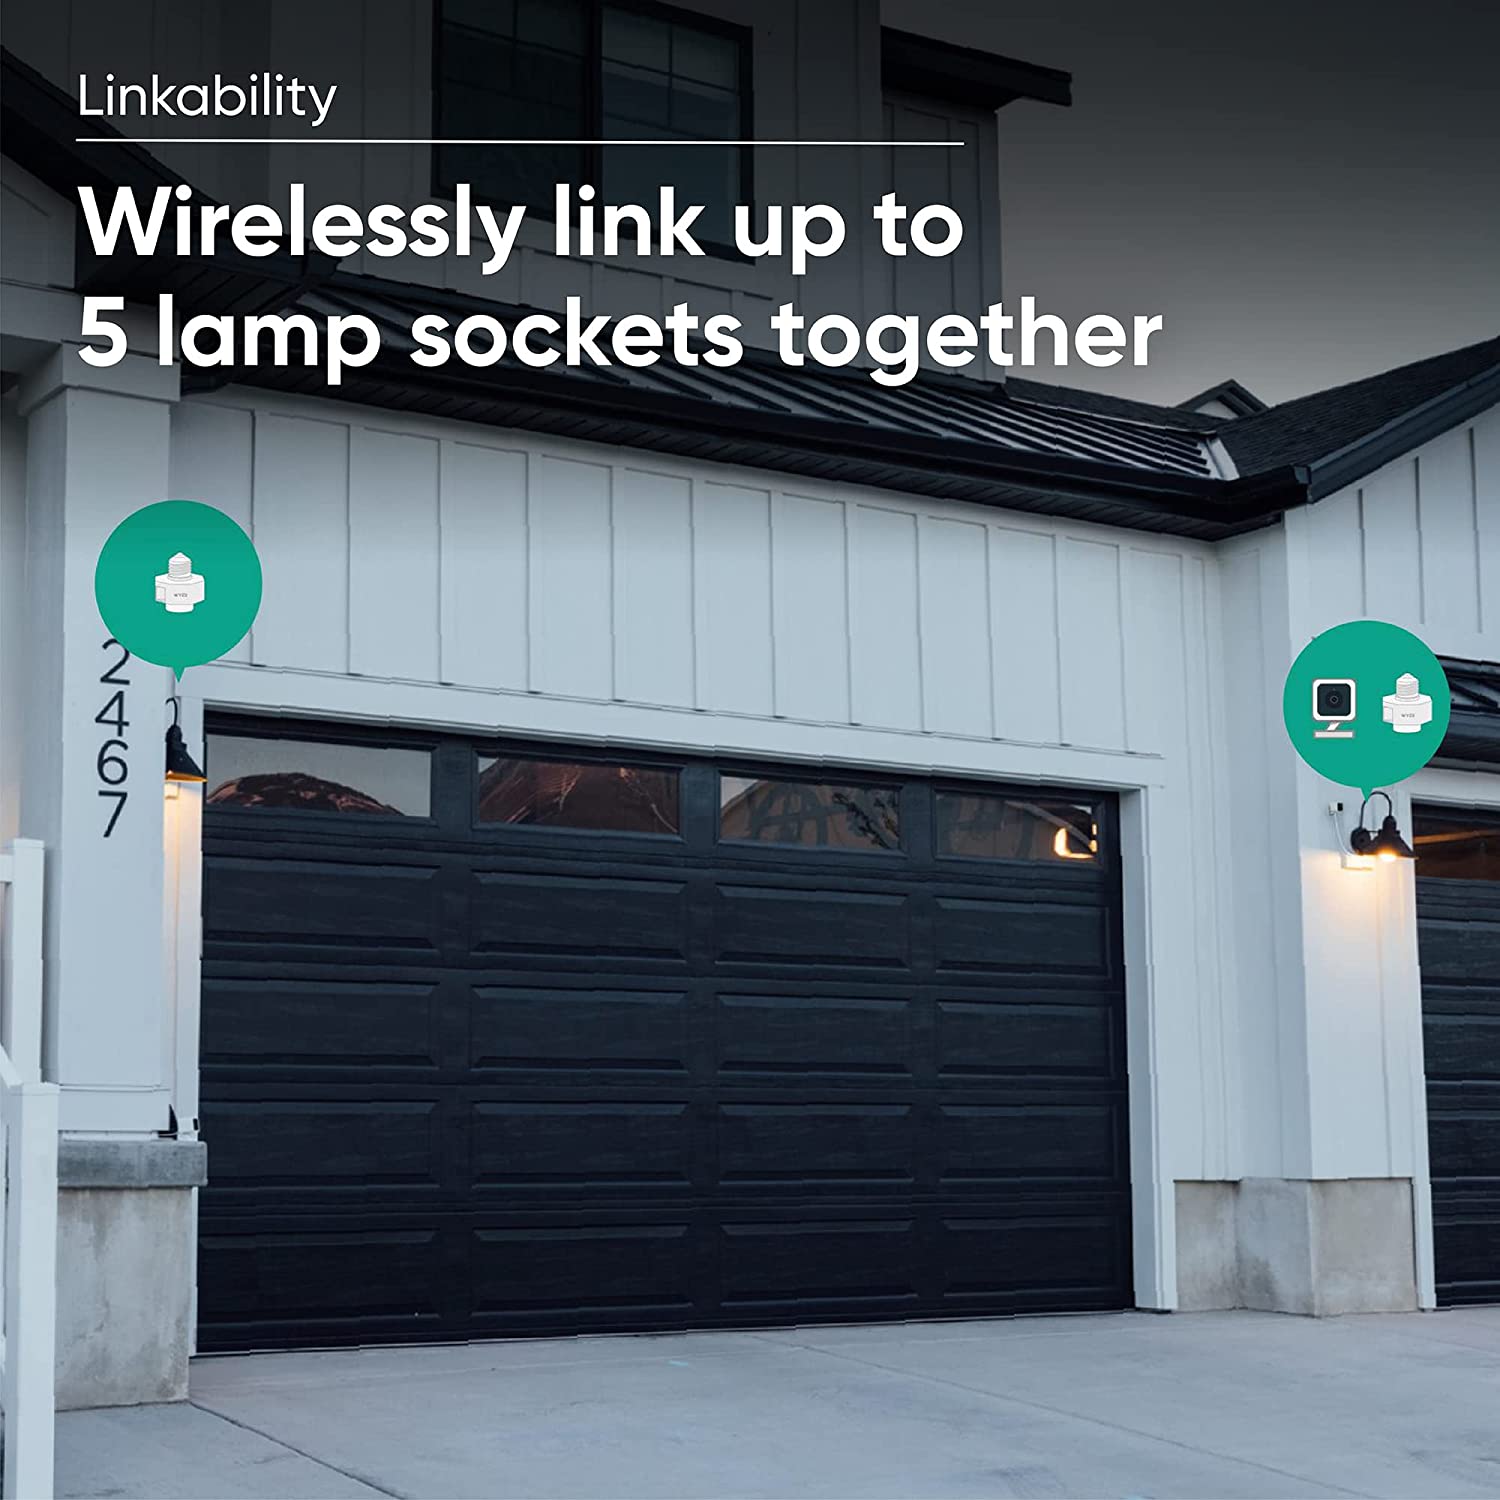 Front view of a house with Wyze Lamp Socket and Cam v3 attached to one light, while only a single Lamp Socket is attached to another light. Text overlay that says "Wirelessly link up to 5 lamp sockets together."